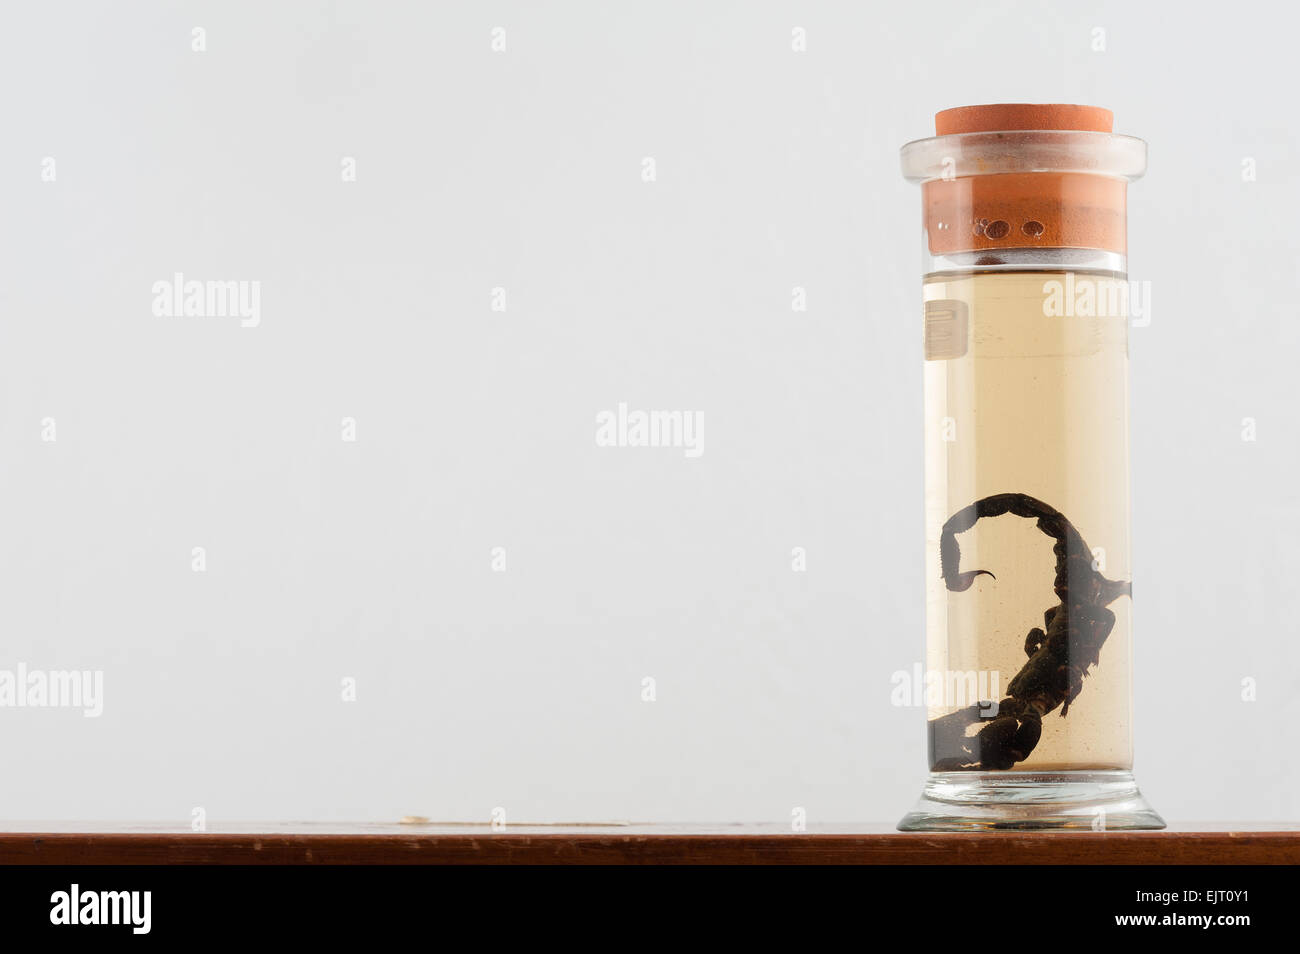 coiled tail and sting of preserved large black emperor scorpion Pandinus imperator Stock Photo